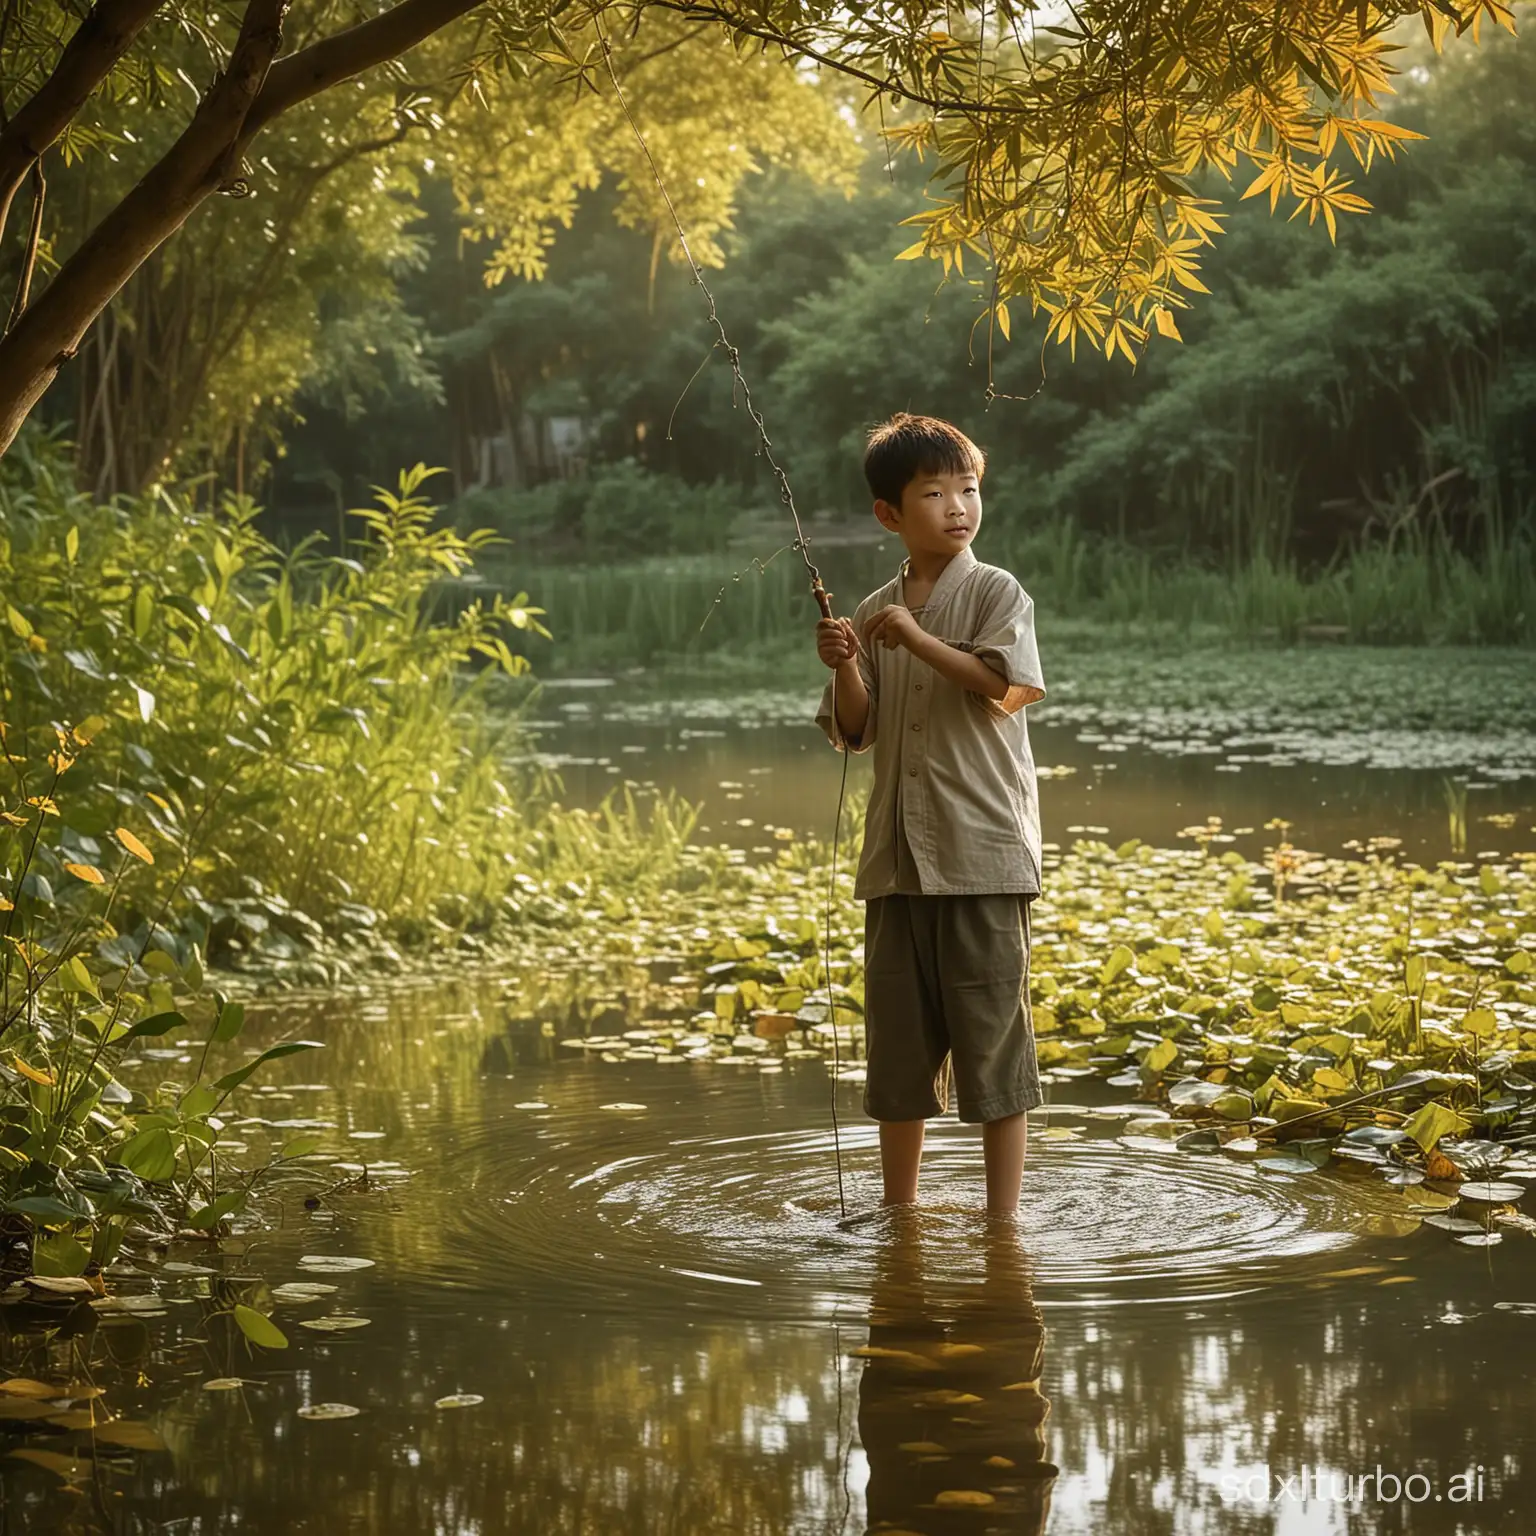 "Visualize a serene summer afternoon in the countryside of East China. The scene is bathed in warm, golden sunlight that pours over the landscape like liquid amber. Frame the image around a tranquil pond, surrounded by lush greenery and ancient trees that provide a dappled shade.  In the foreground, depict a young boy, no more than eight years old, squatted under the willow's canopy. His face should show a mixture of innocence and anticipation. He's holding a handcrafted bamboo fishing rod, a gift from his father, with care and attention.  Focus on the detail of the fishing rod, with a fine, sturdy silk line attached to a piece of bright, fatty meat that serves as bait. The meat should be depicted as vibrant and enticing, capable of attracting crayfish from the pond.  Around the pond, include lively elements such as birds singing joyfully in the treetops and a gentle breeze rustling the leaves, carrying the scent of lotus flowers. Show the water's surface with subtle ripples, hinting at the presence of crayfish.  The setting sun casts a soft, golden light, creating a picturesque atmosphere. The boy's patience is rewarded as he feels a tug on his fishing line, his eyes wide with excitement as he begins to lift the rod, revealing the catch of the day.  Create a sense of harmony between the boy and his natural surroundings, capturing the essence of simple joys and the beauty of rural life in East China."